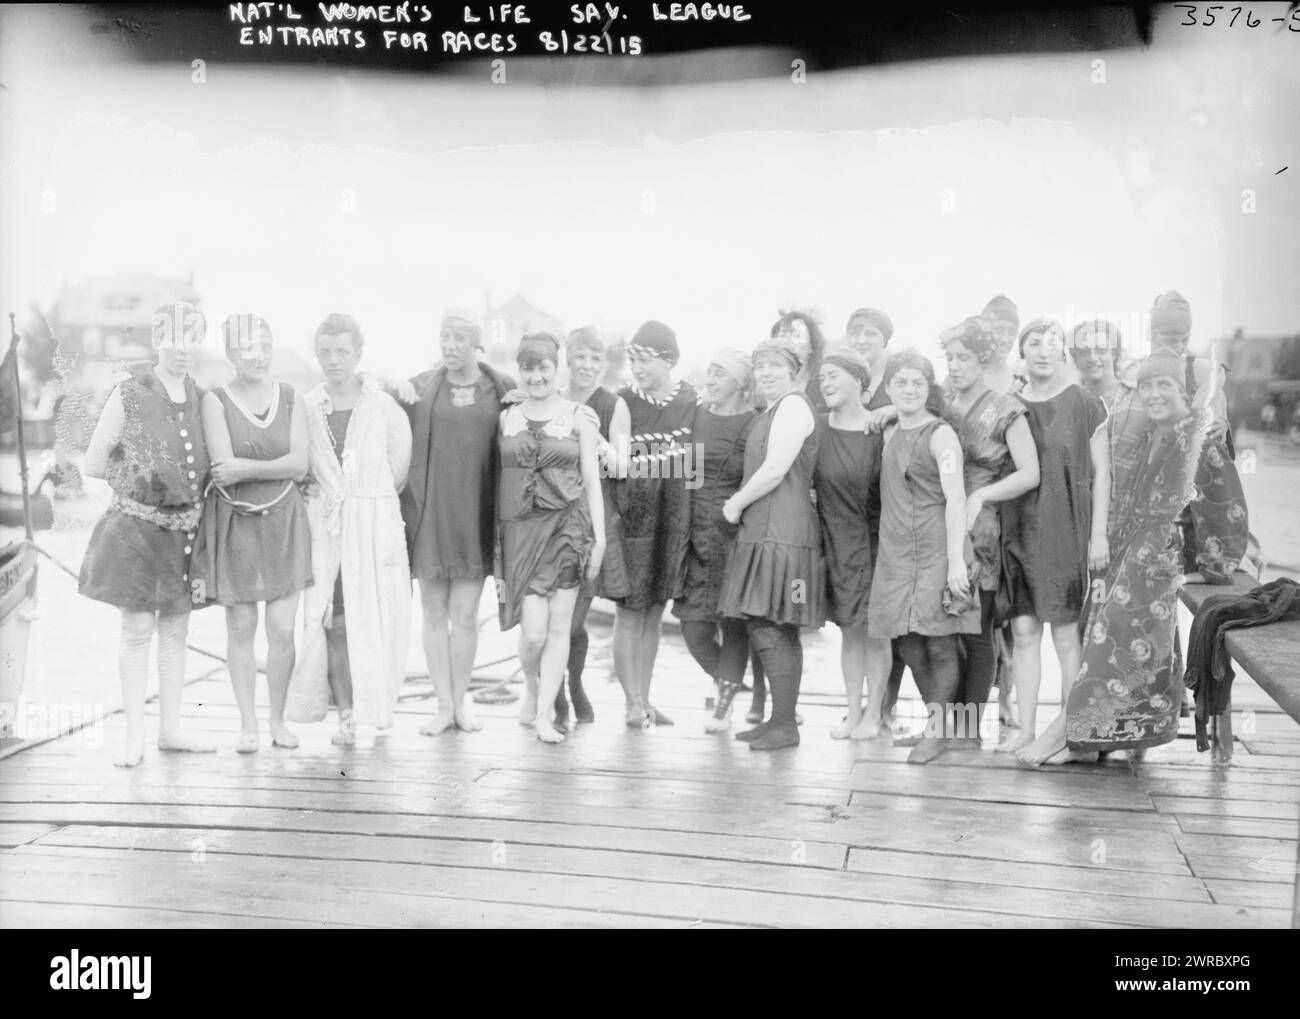 Nat'l Women's Life Sav. League entrants for races, 8/22/15, Photograph shows contestants for the National Women's Life Saving League annual contest held at Chisolm's Bathing Pavillion at Sheepshead Bay, Brooklyn, New York., 8/22/15, Glass negatives, 1 negative: glass Stock Photo